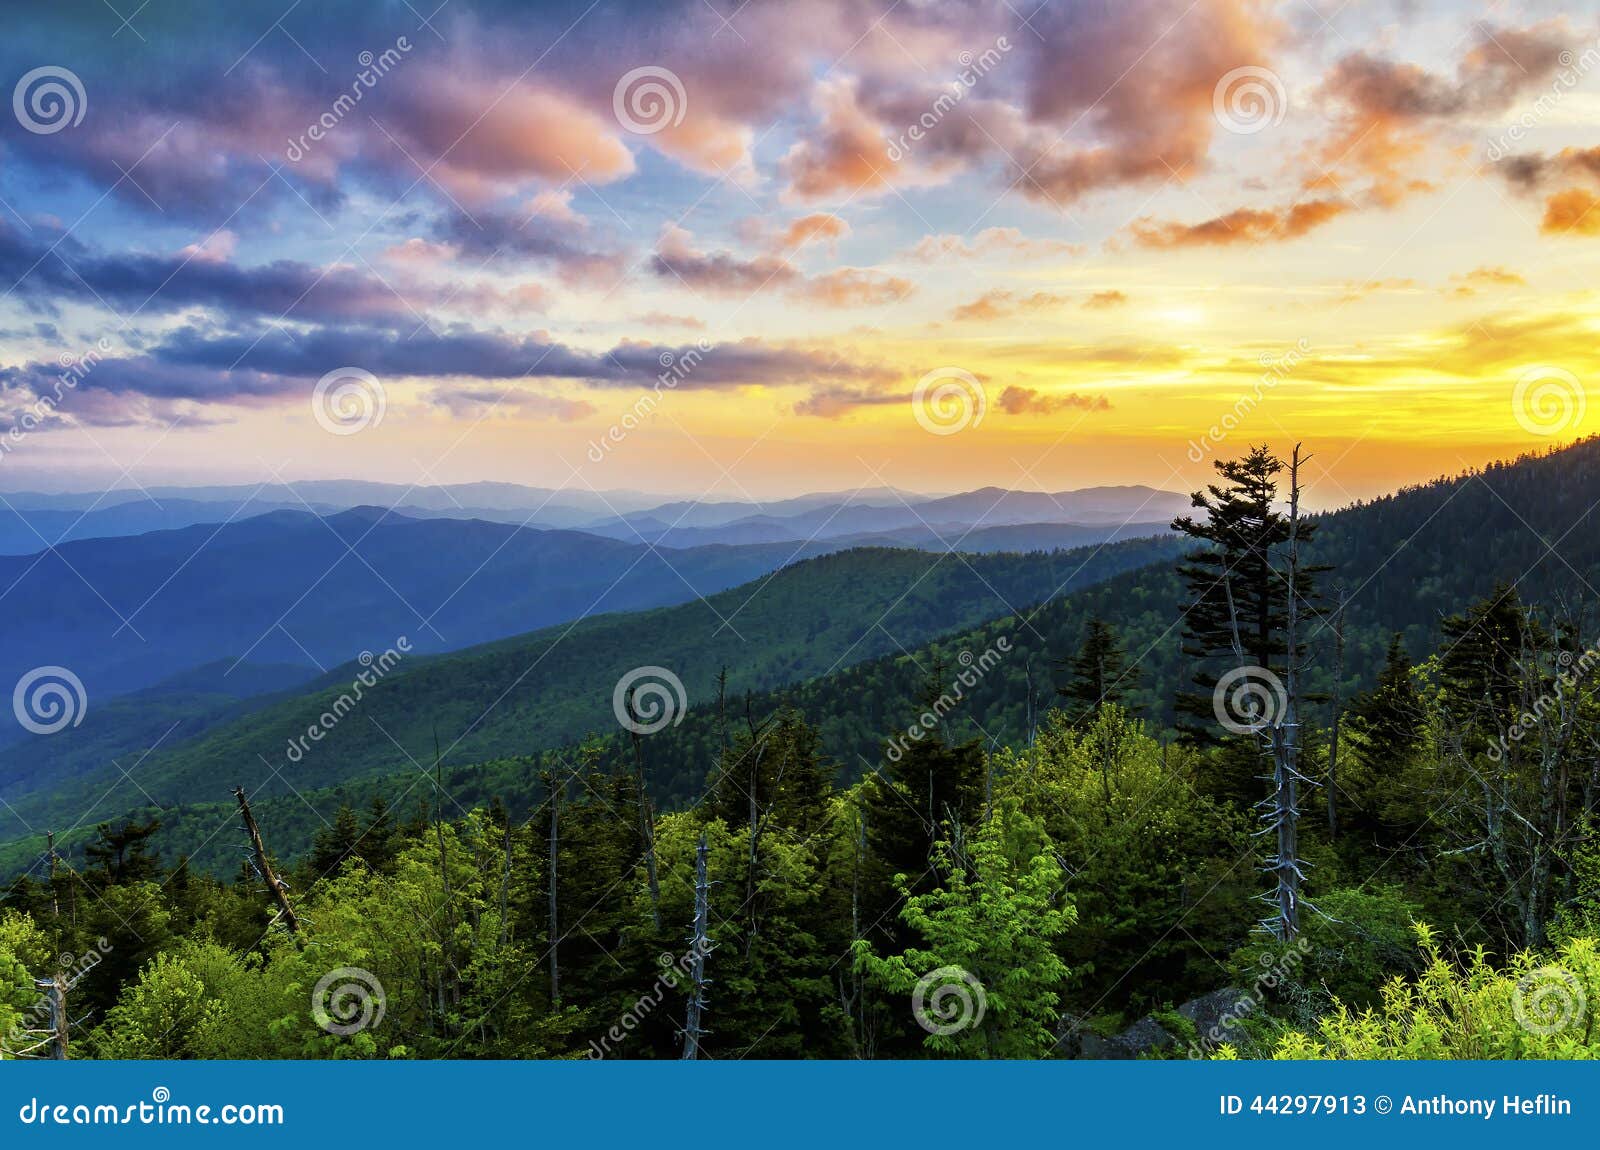 clingmans dome, great smoky mountains, tennessee